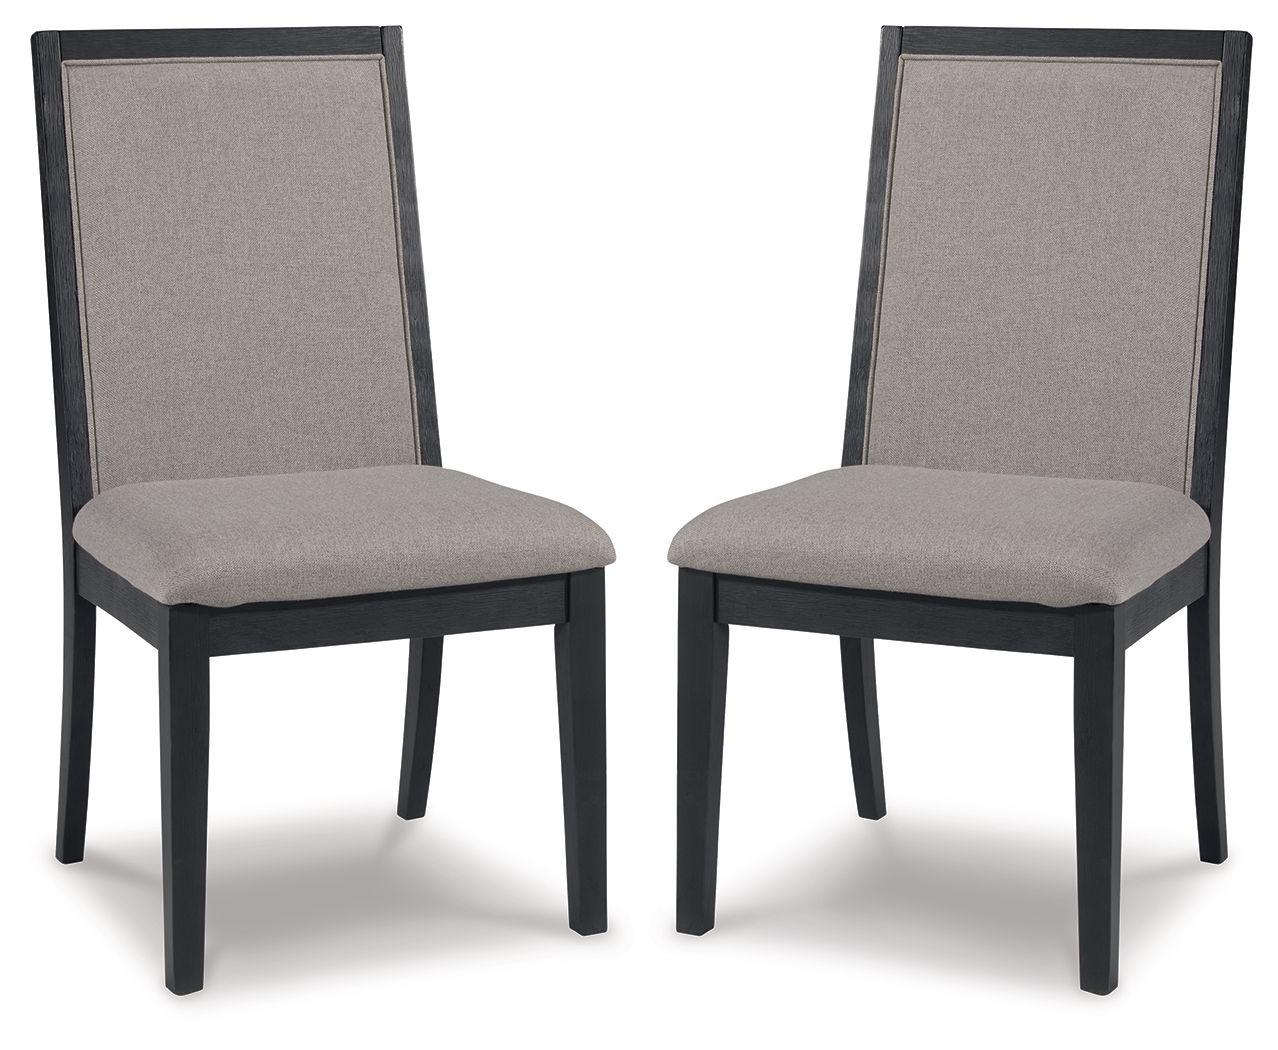 Foyland - Light Gray / Black - Dining Uph Side Chair (Set of 2) Tony's Home Furnishings Furniture. Beds. Dressers. Sofas.